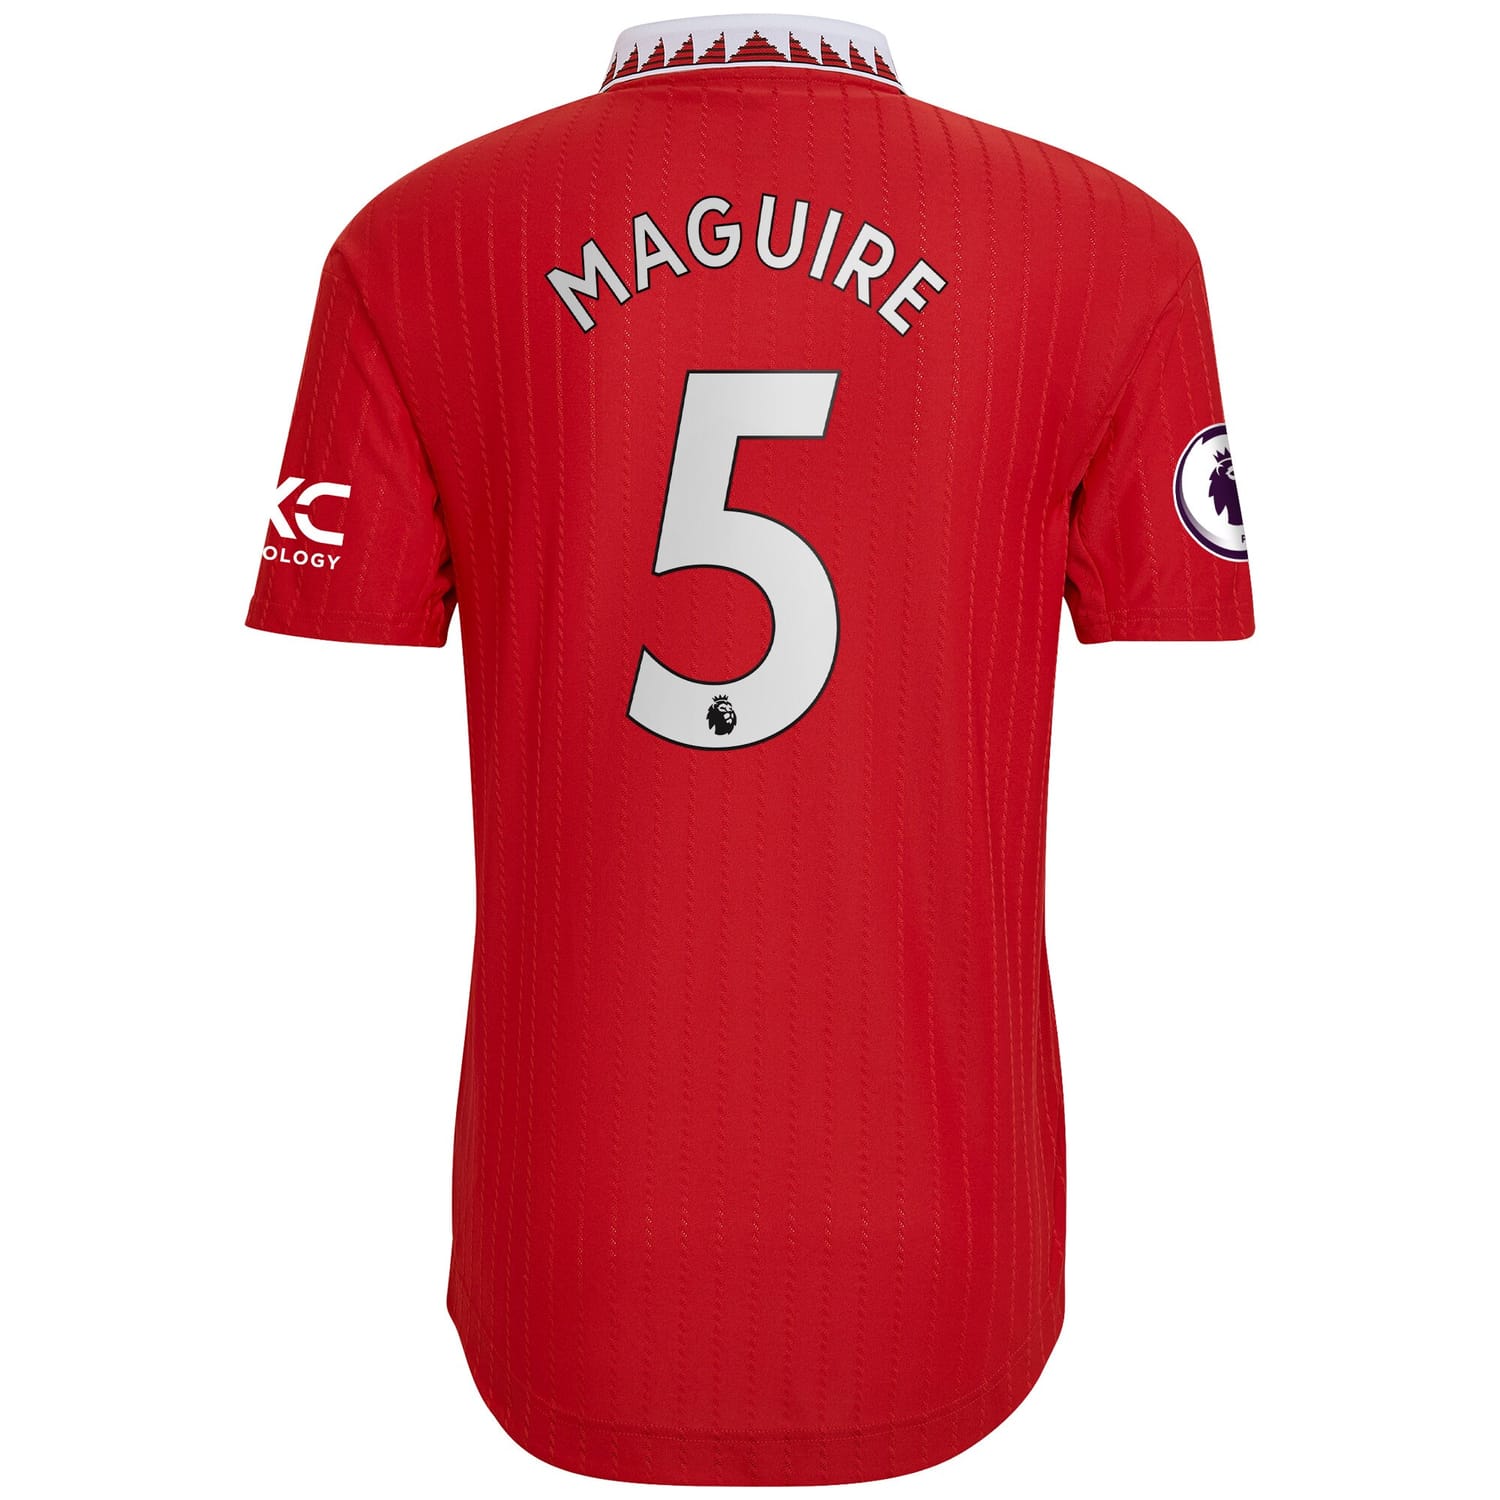 Premier League Manchester United Home Authentic Jersey Shirt Red 2022-23 player Harry Maguire printing for Men